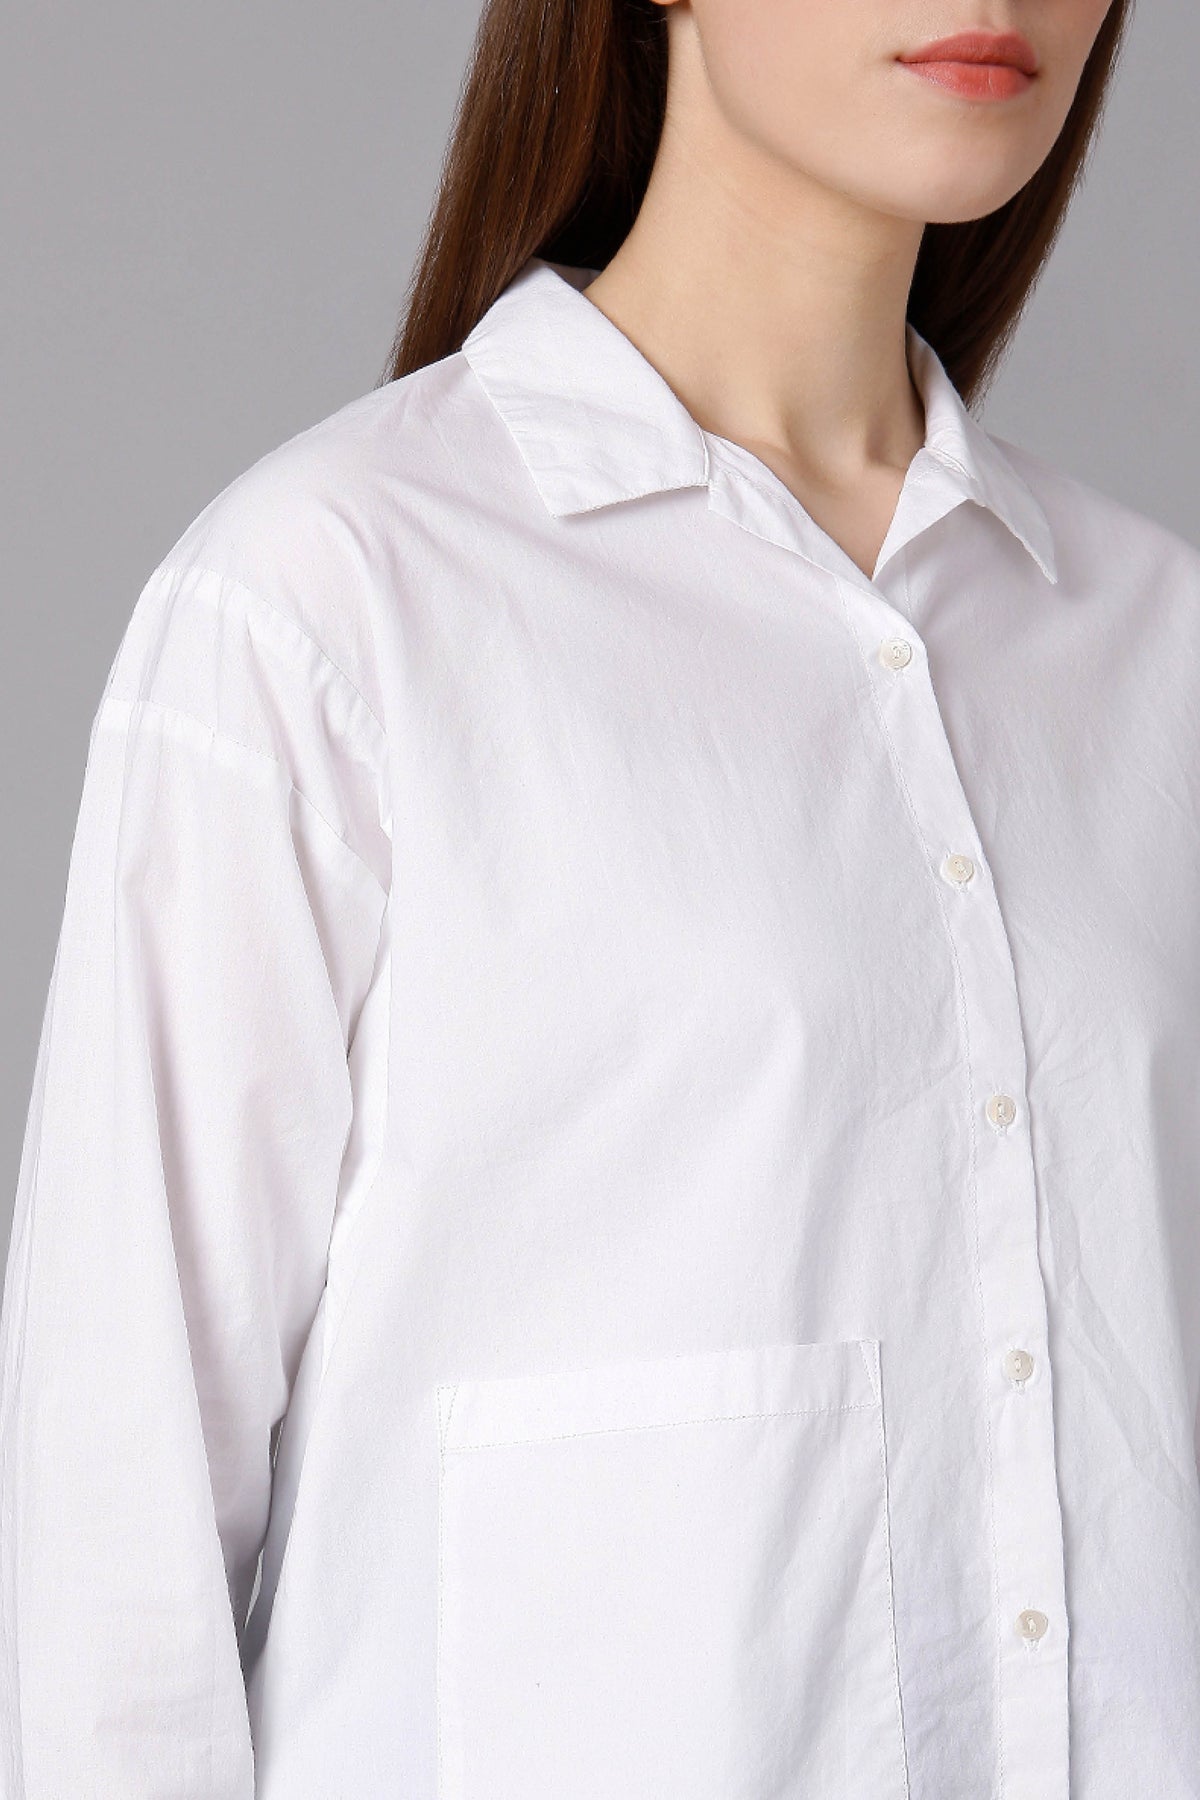 White Shirt with Long Sleeves